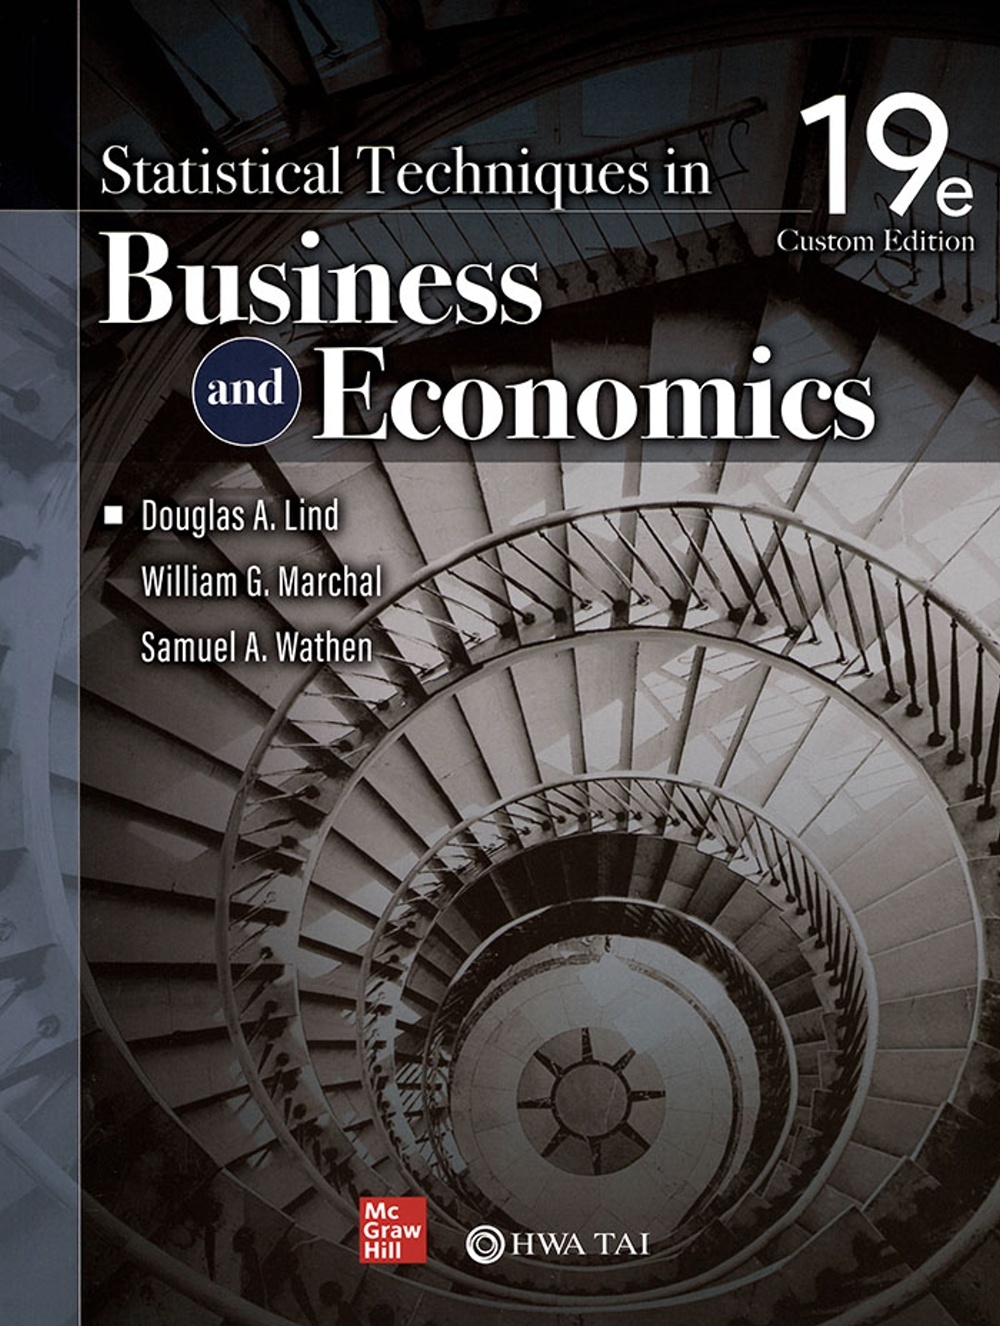 Statistical Techniques in Business and Economics(Custom Edition)(19版)